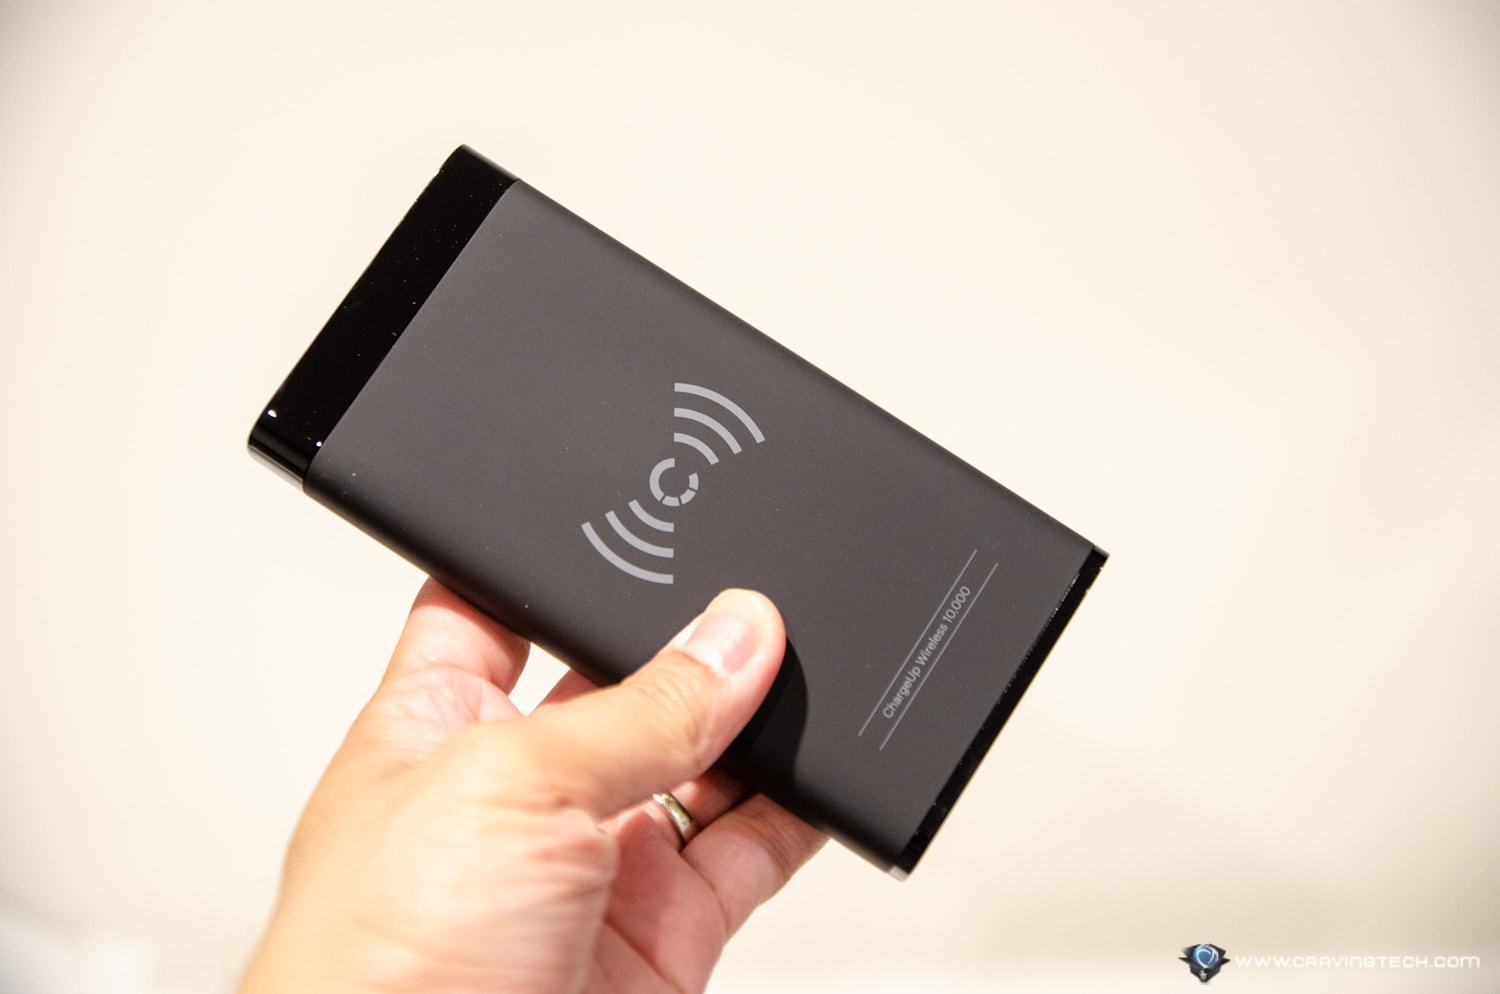 Portable battery with no cables needed – Cygnett ChargeUp Swift 10K Wireless Power Bank Review